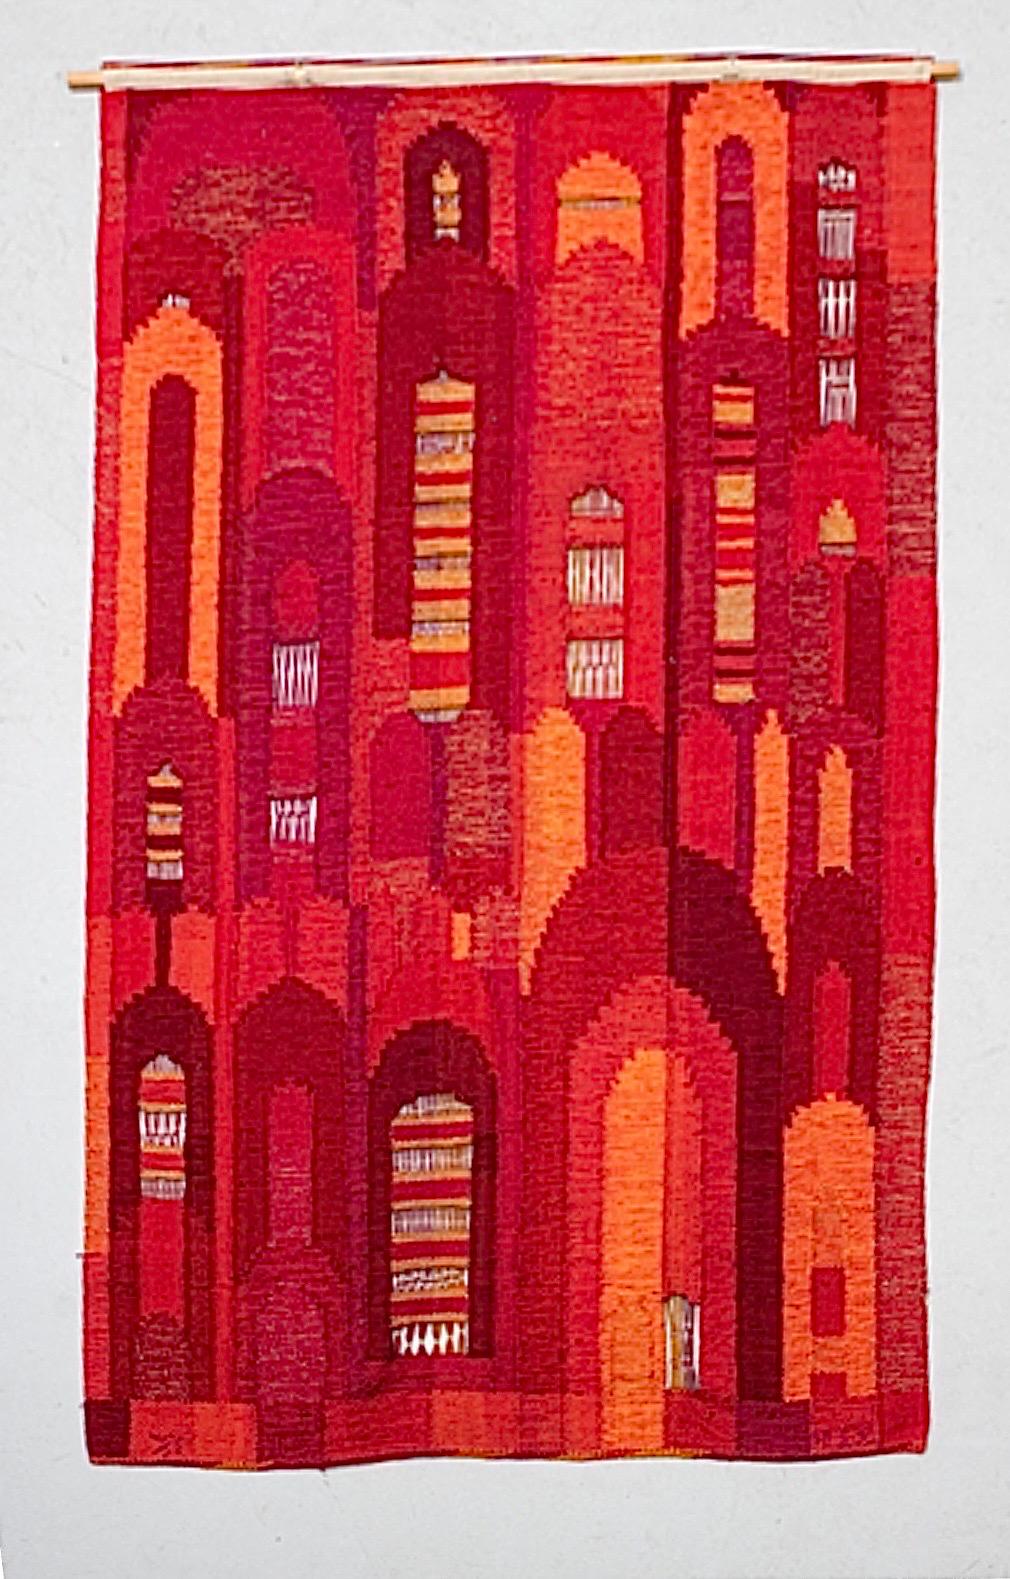 This is the Swedish considerable large tapestry by Irma Kronlund, handwoven for Kronoberg Läns Hemslöjd, measuring majestic 90x56 in (229x142 cm). 

It comes in a beautifully color range in red and orange and this wonderful motif depicting a group